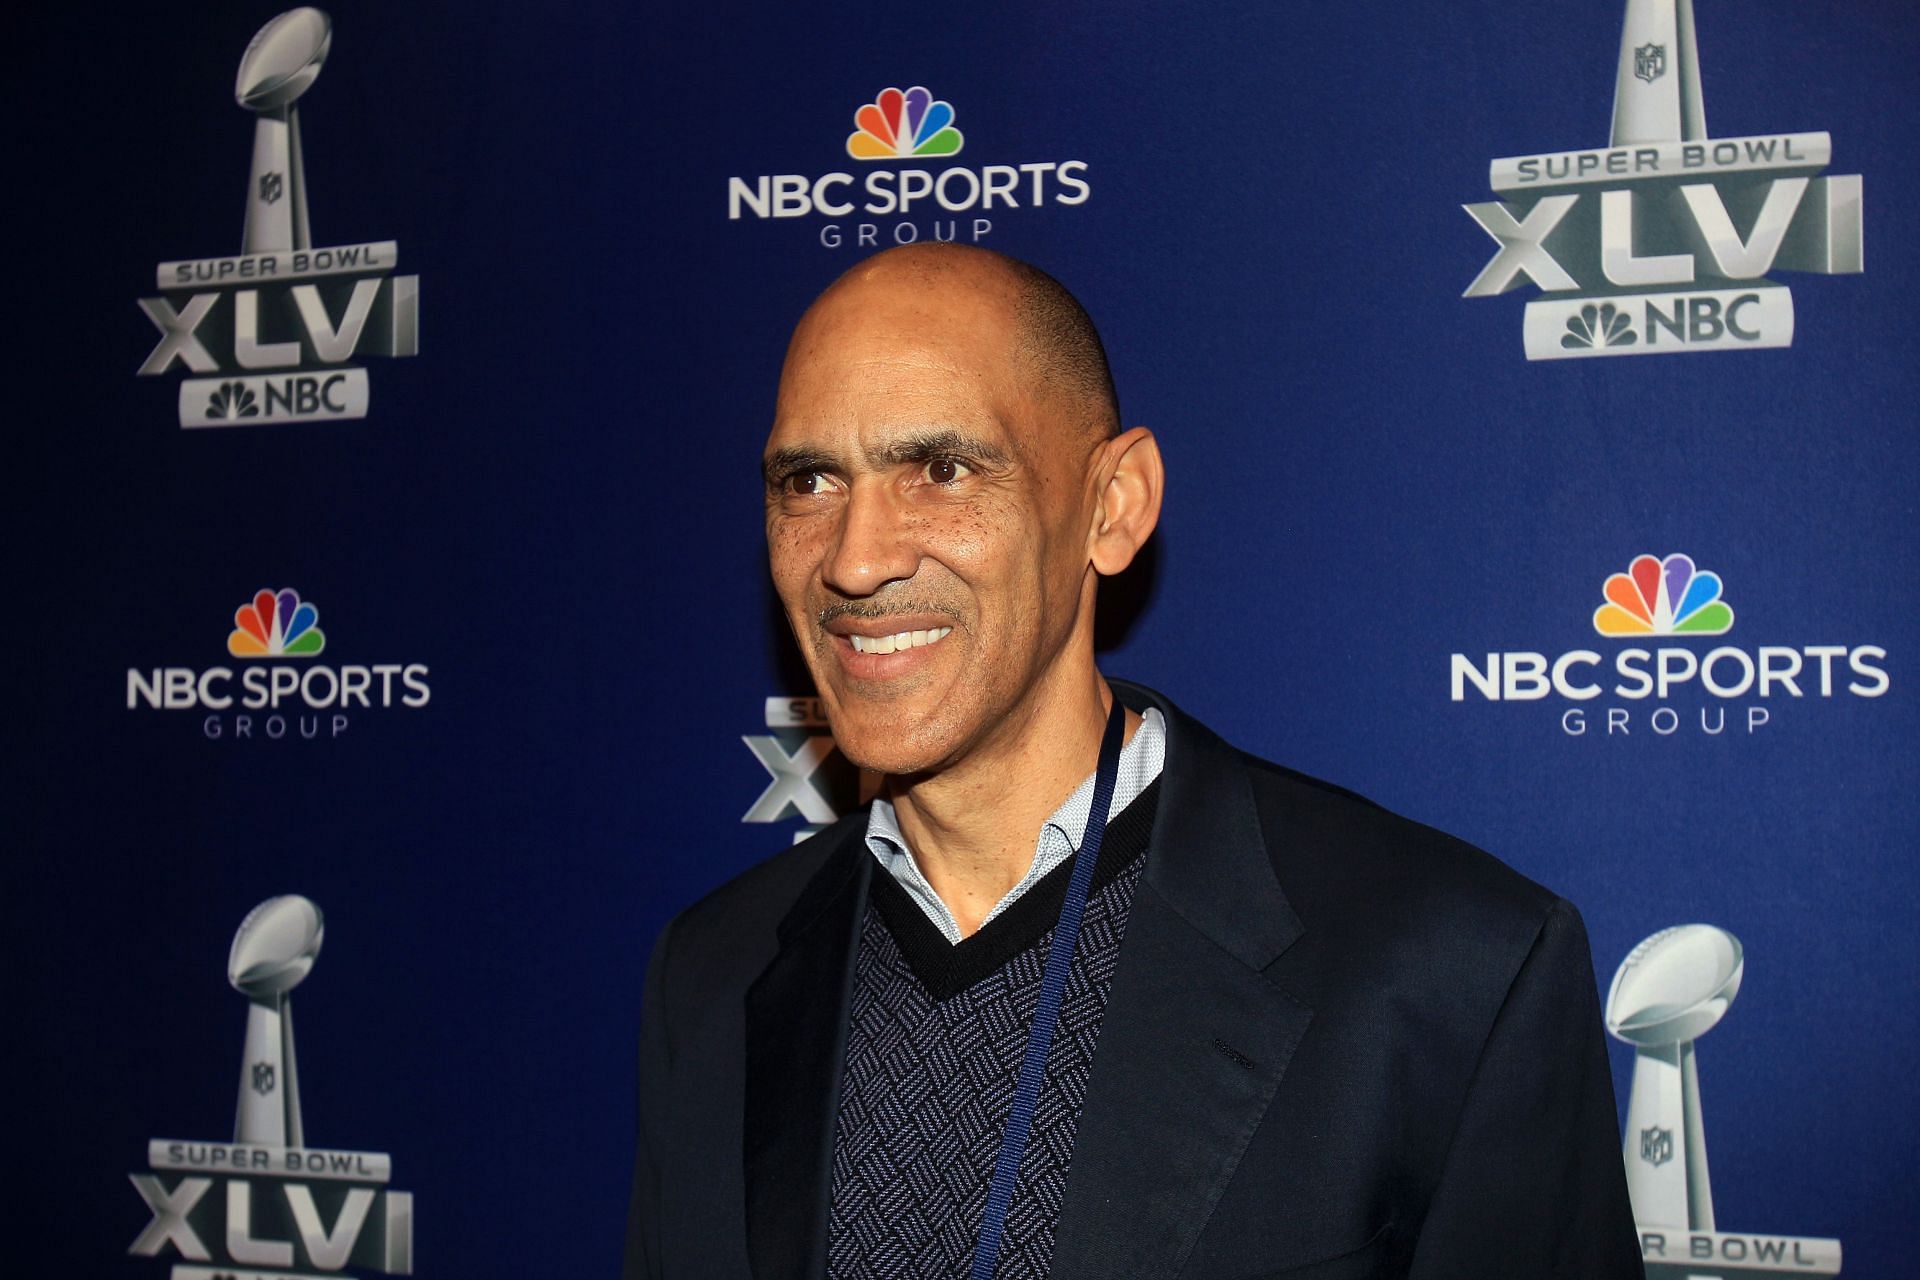 Super Bowl XLVI broadcasters news conference: Tony Dungy